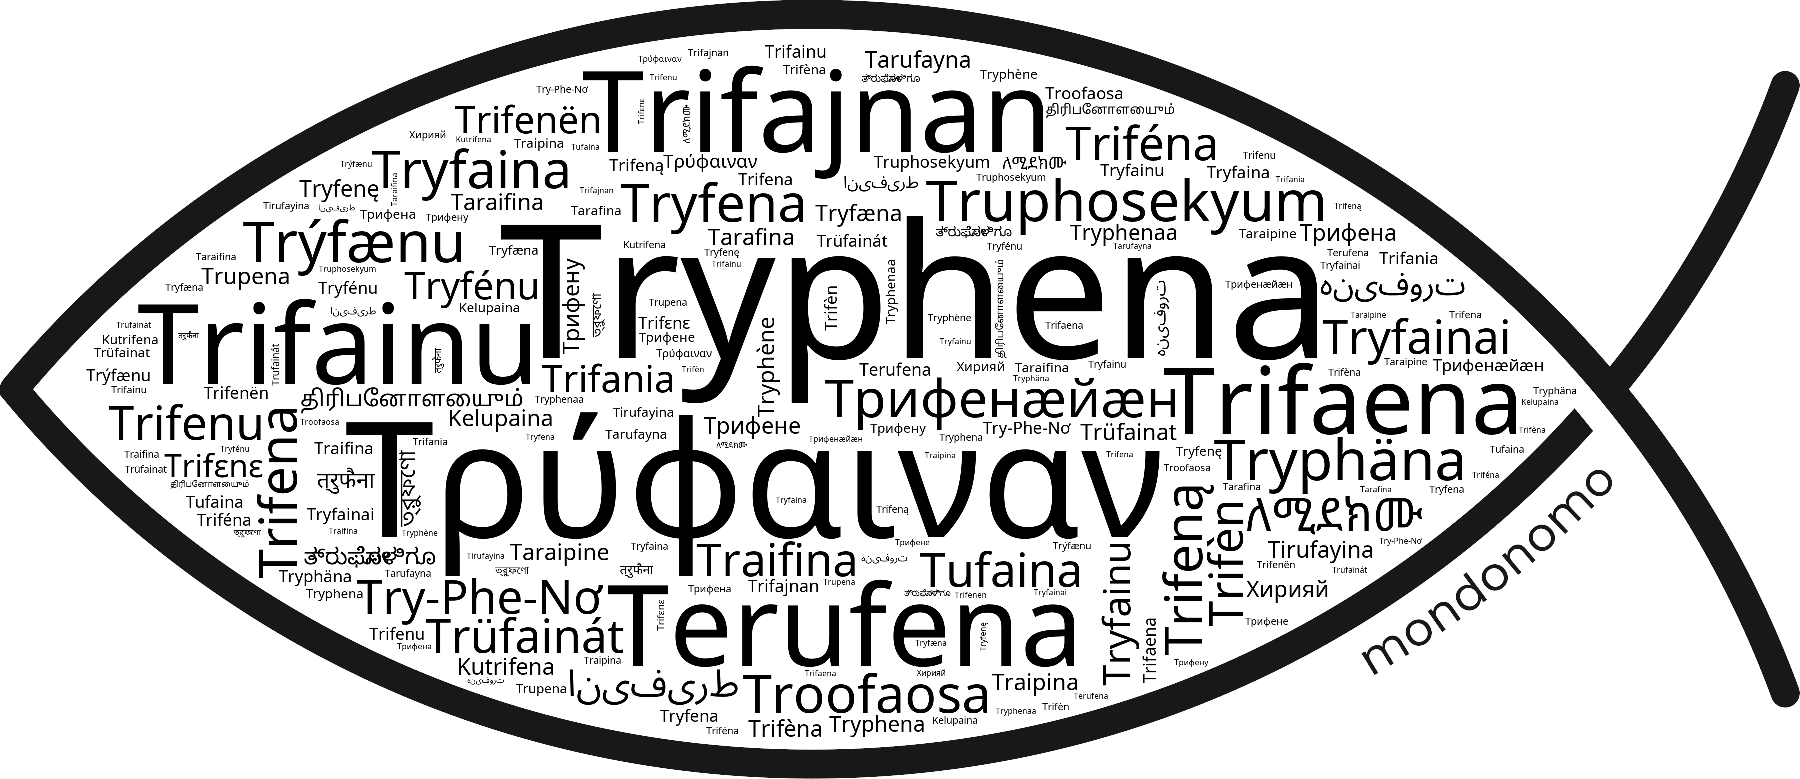 Name Tryphena in the world's Bibles